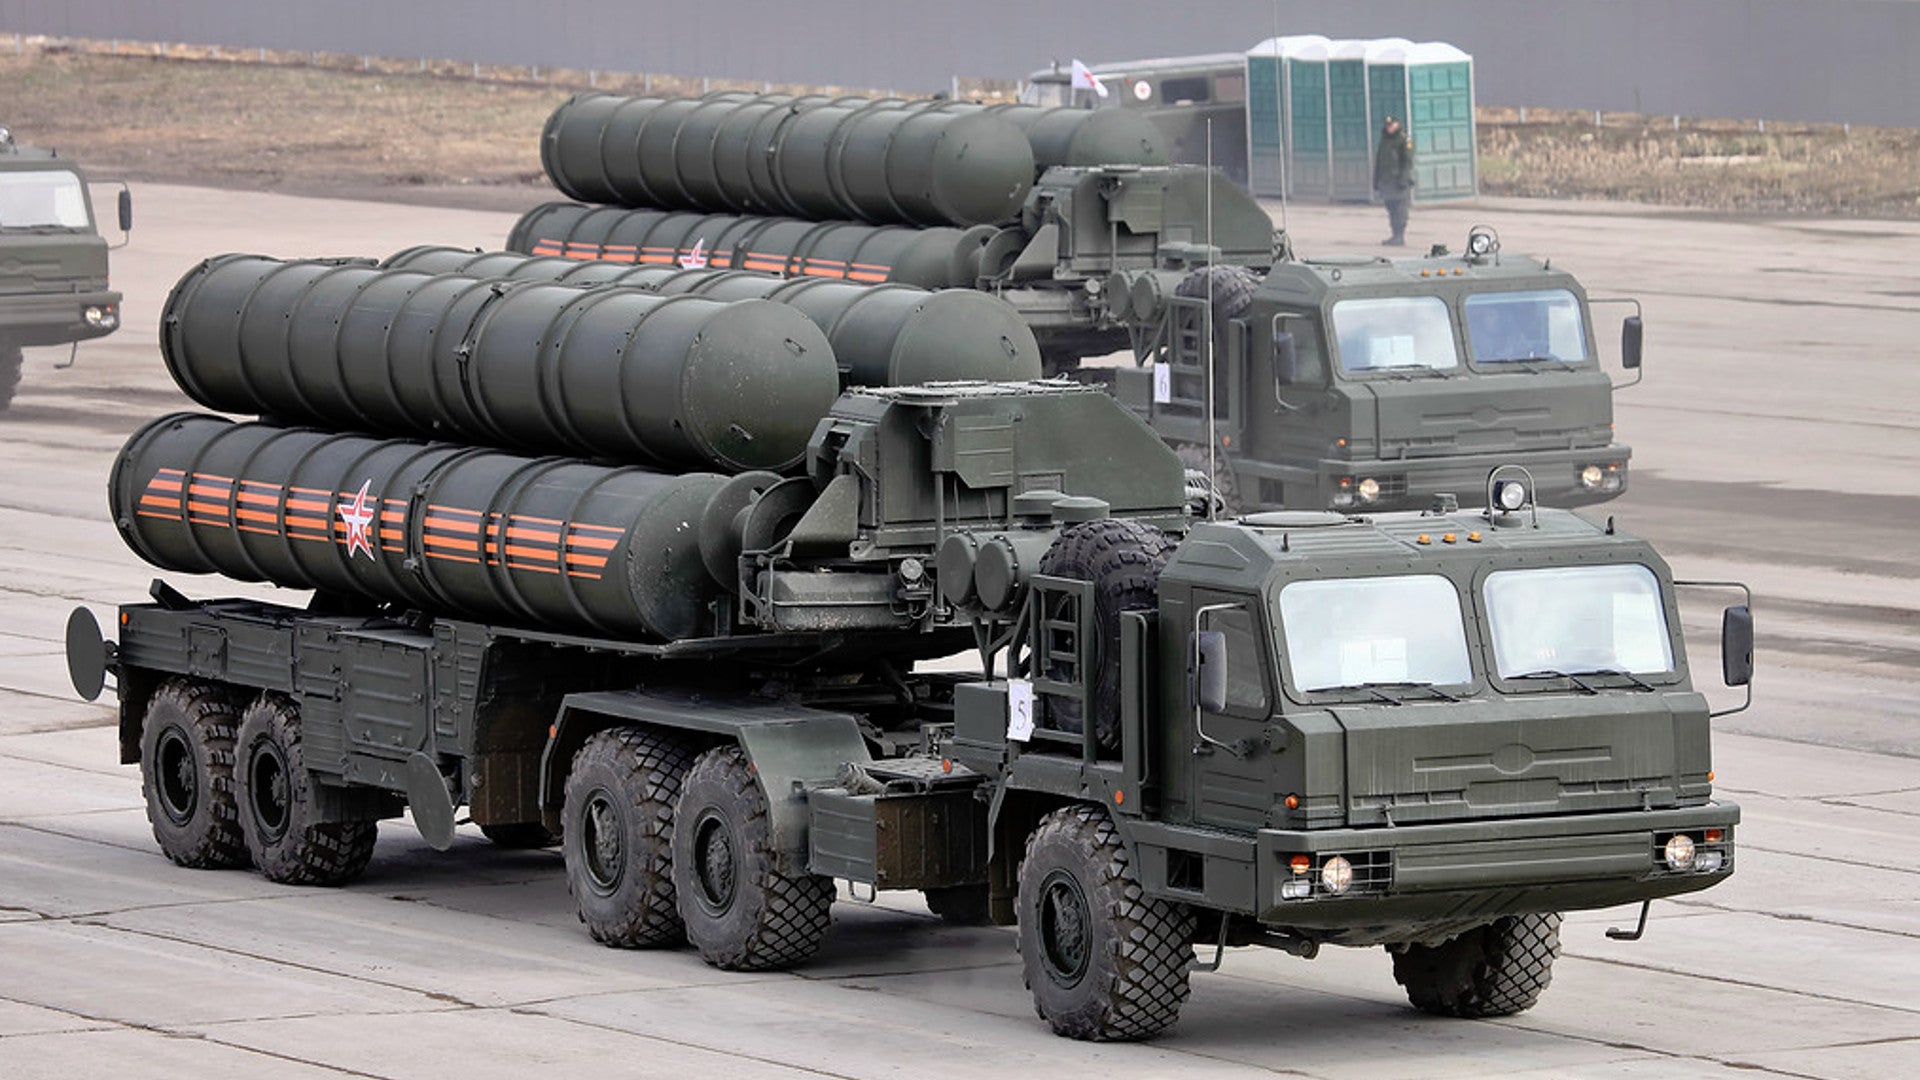 It’s Official, Turkey Is Getting Russia’s S-400 Air Defense System